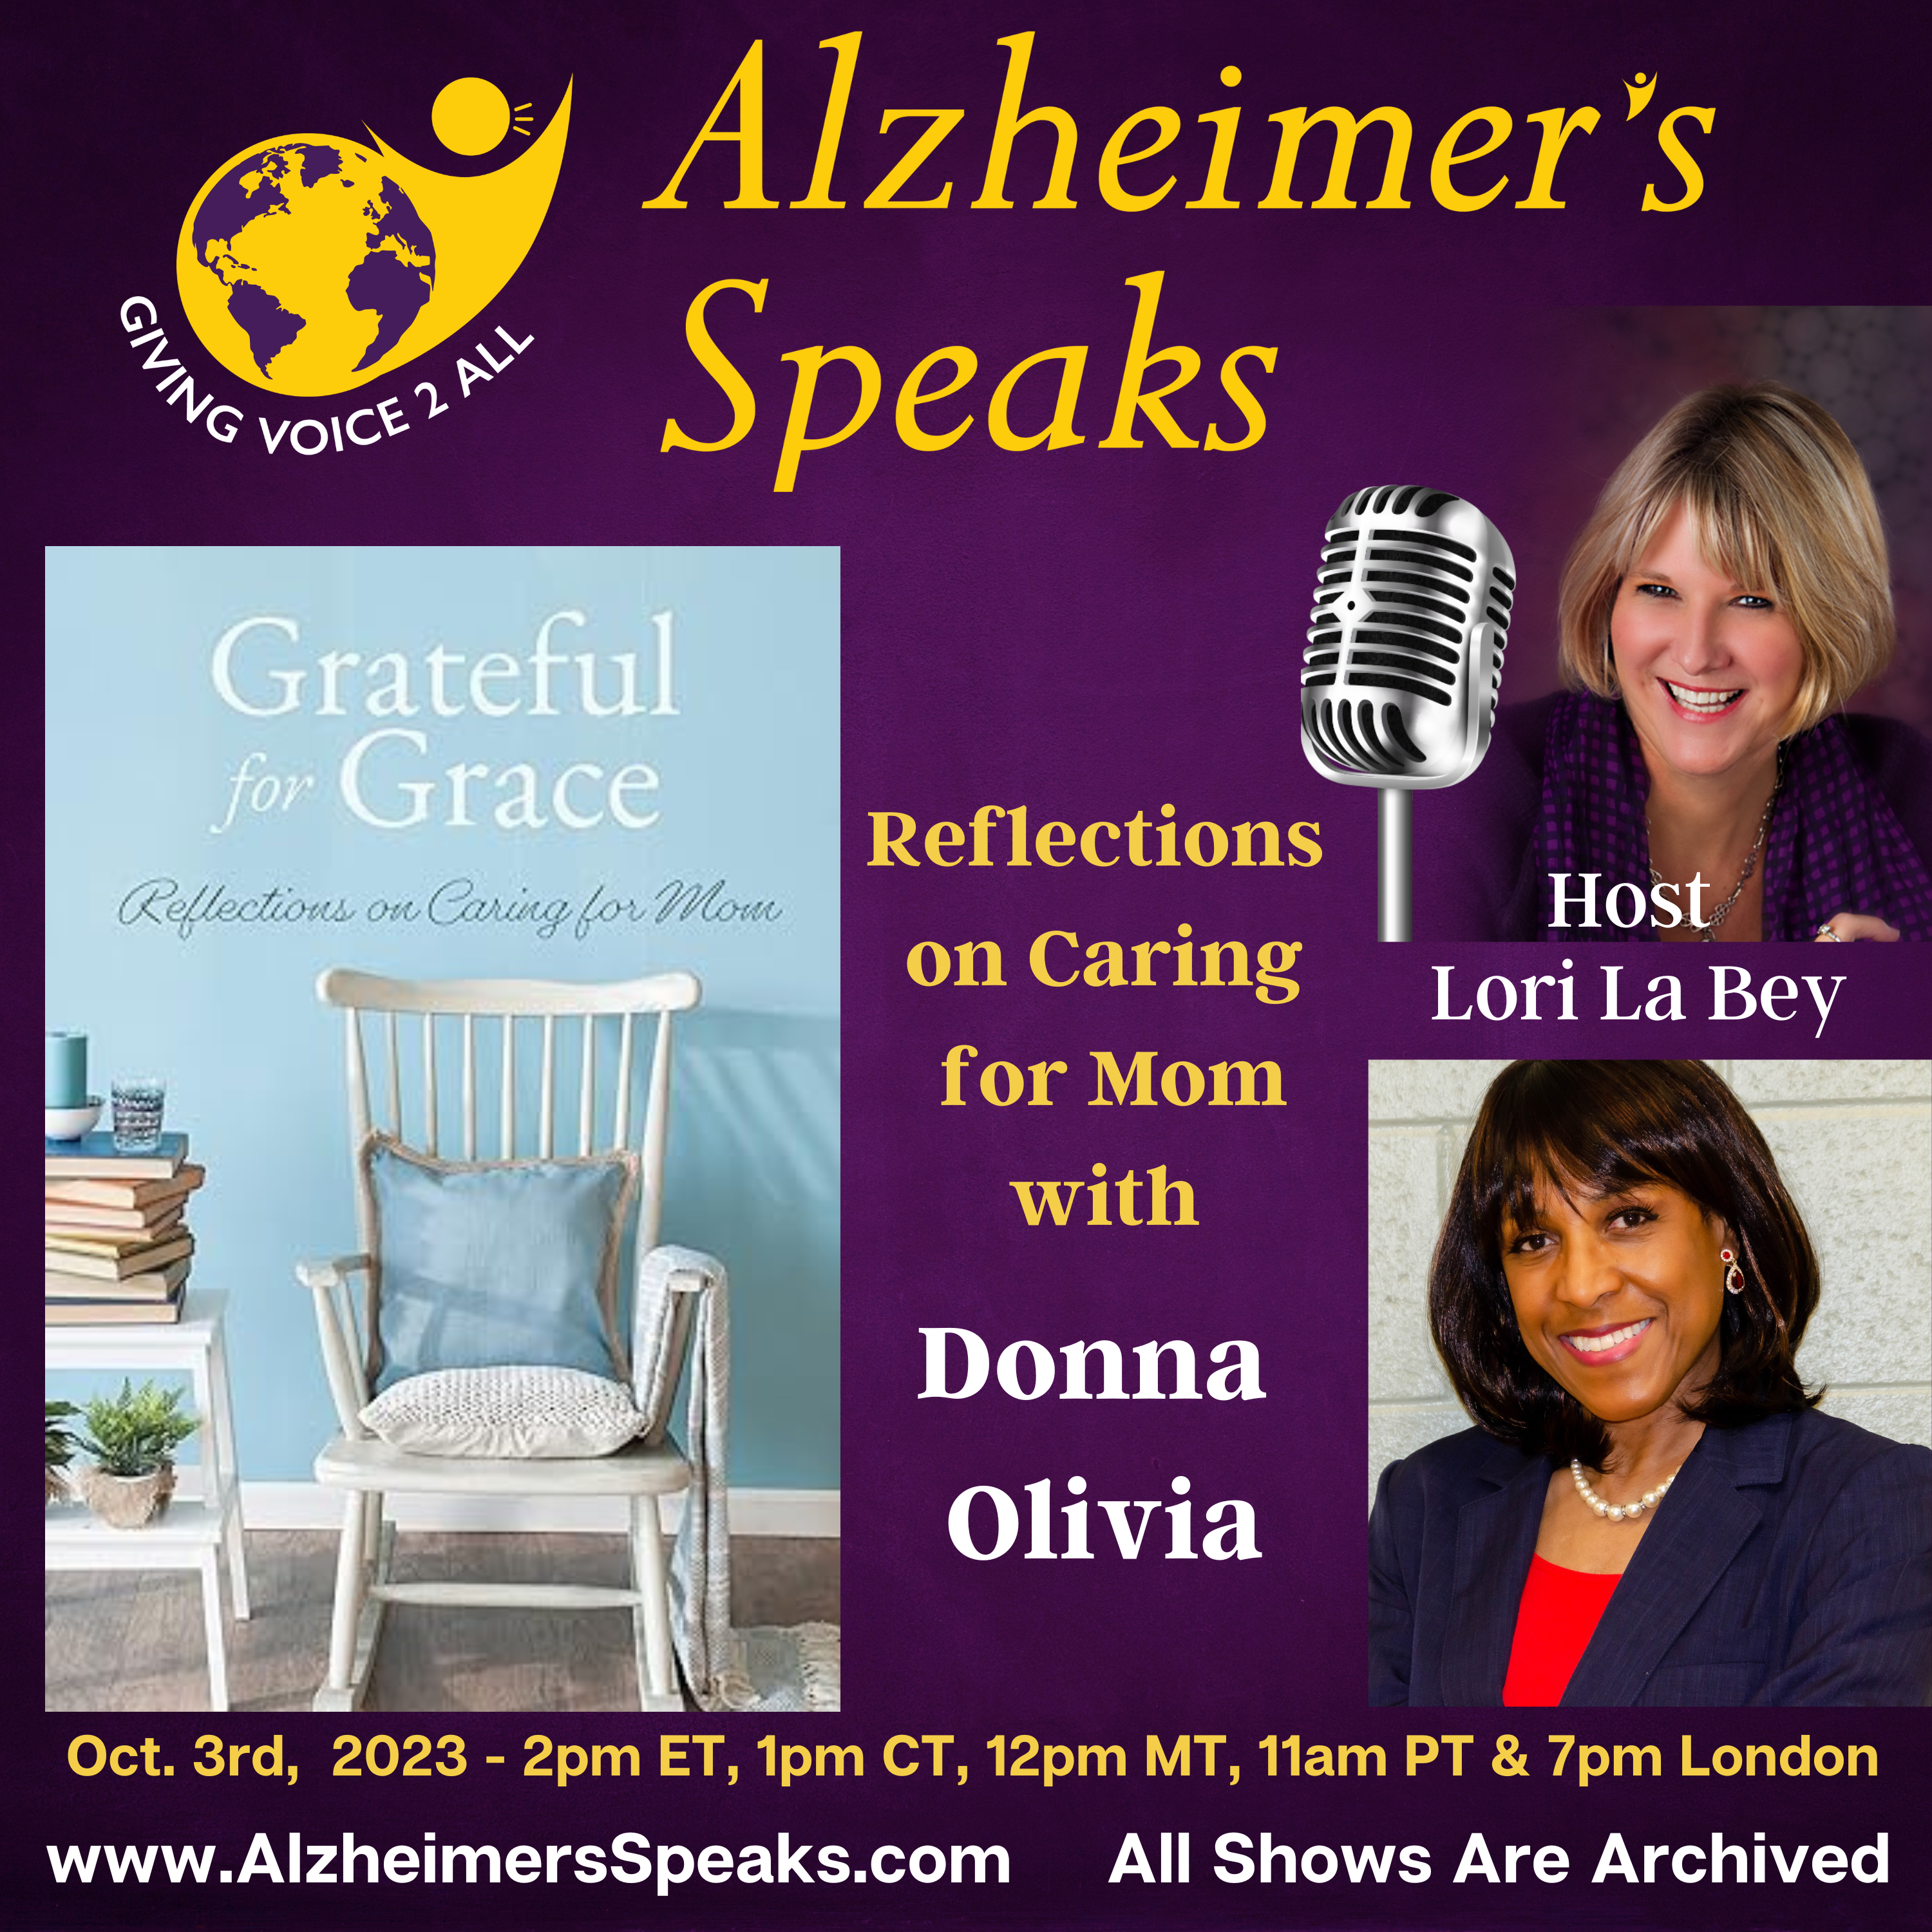 Reflections on Caring for Mom with Author Donna Olivia